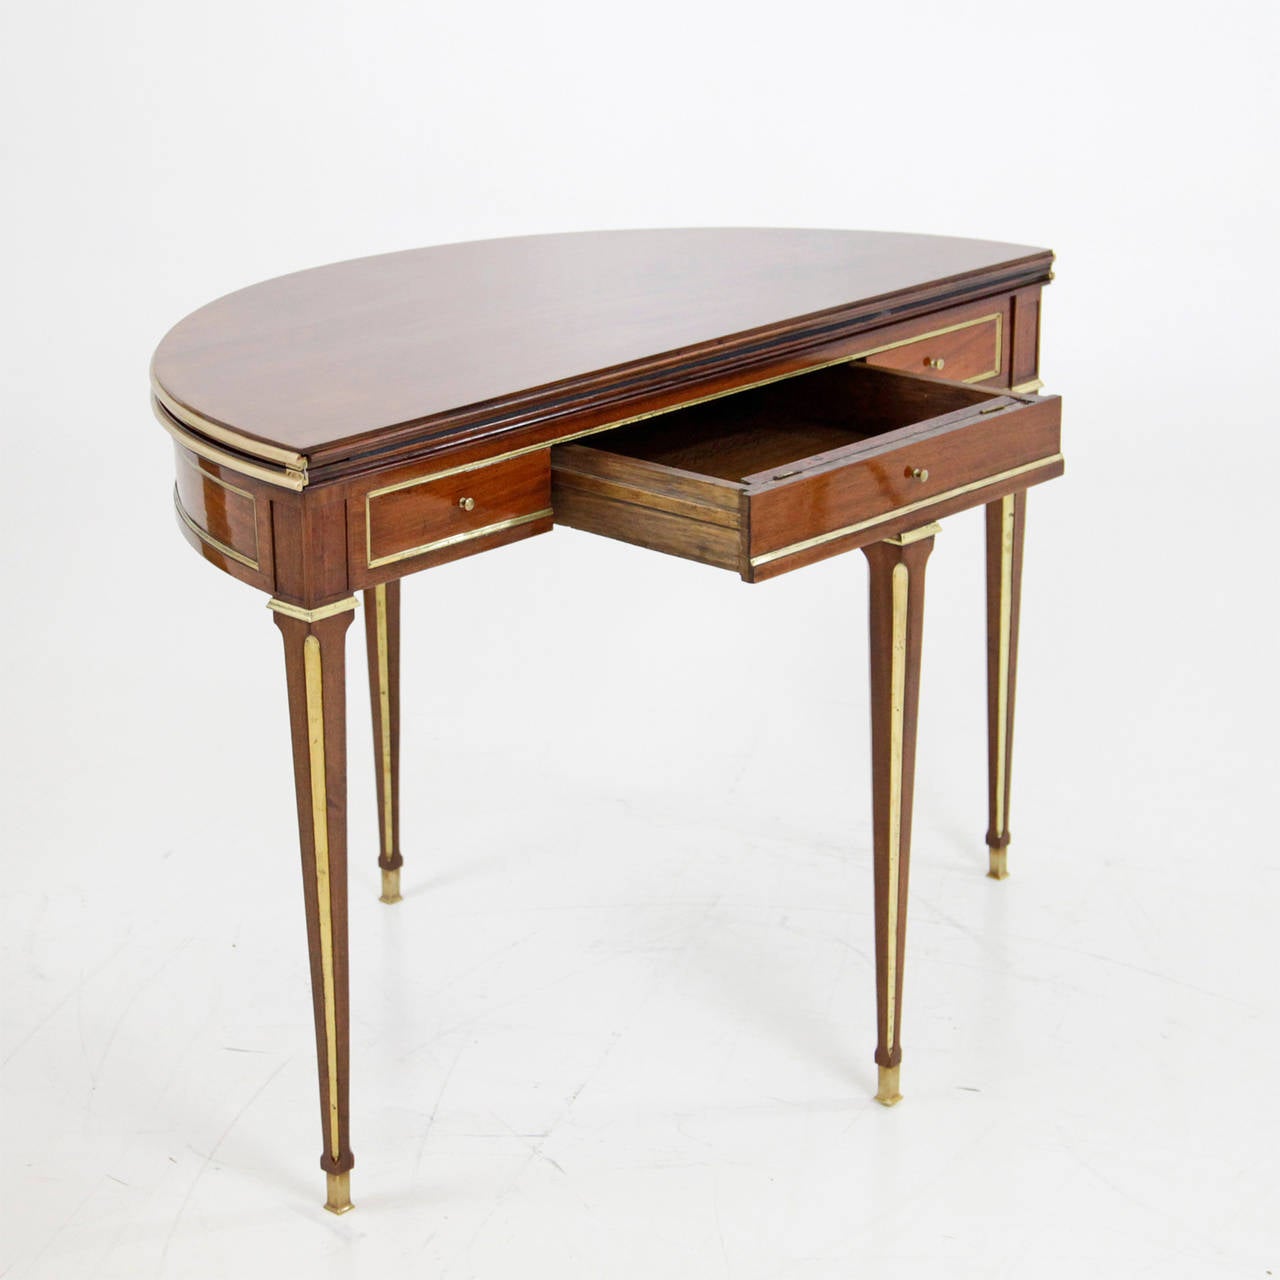 Very nice french Demi Lune Game Table, circa 1810´s.
Elegant console table in a semi-circular shape with brass mounts.
Playing surface upholstered in black leather.
Mahogany veneer.